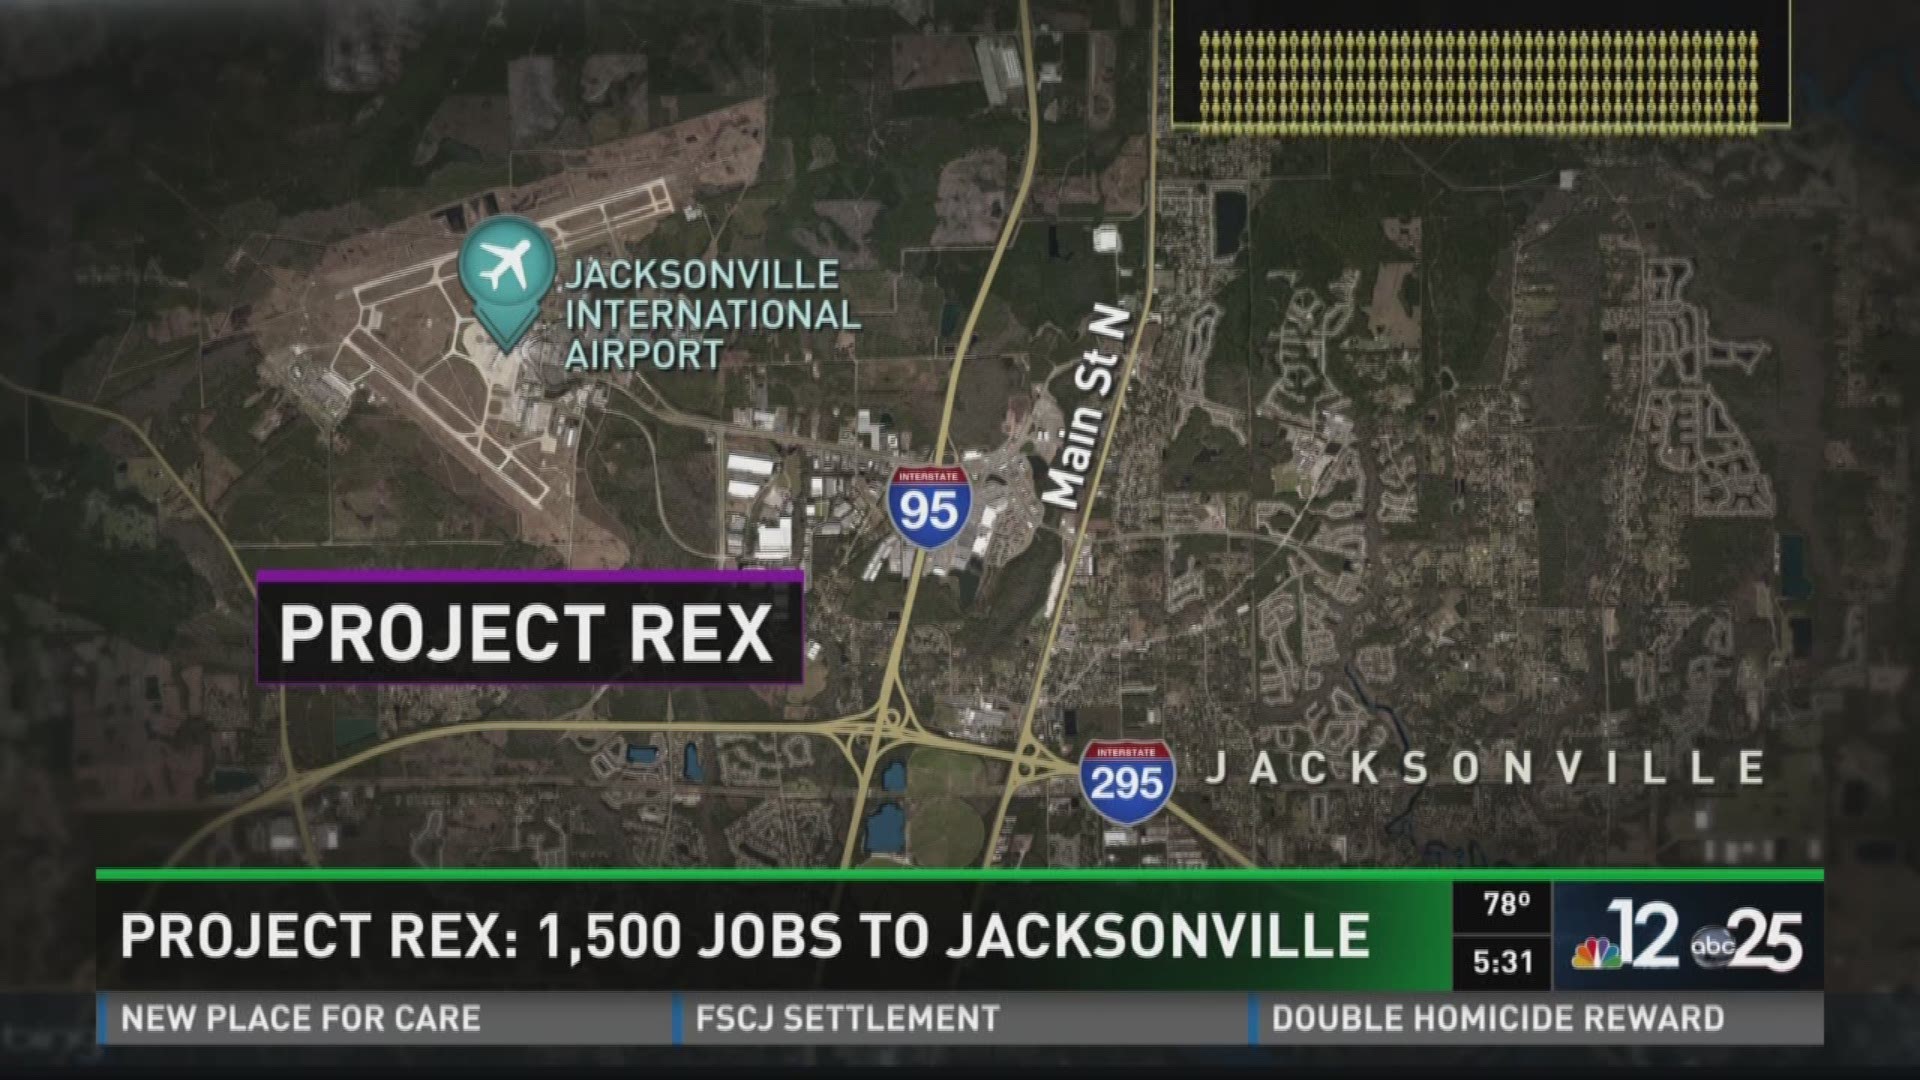 Project Rex could bring 1500 jobs to Jacksonville